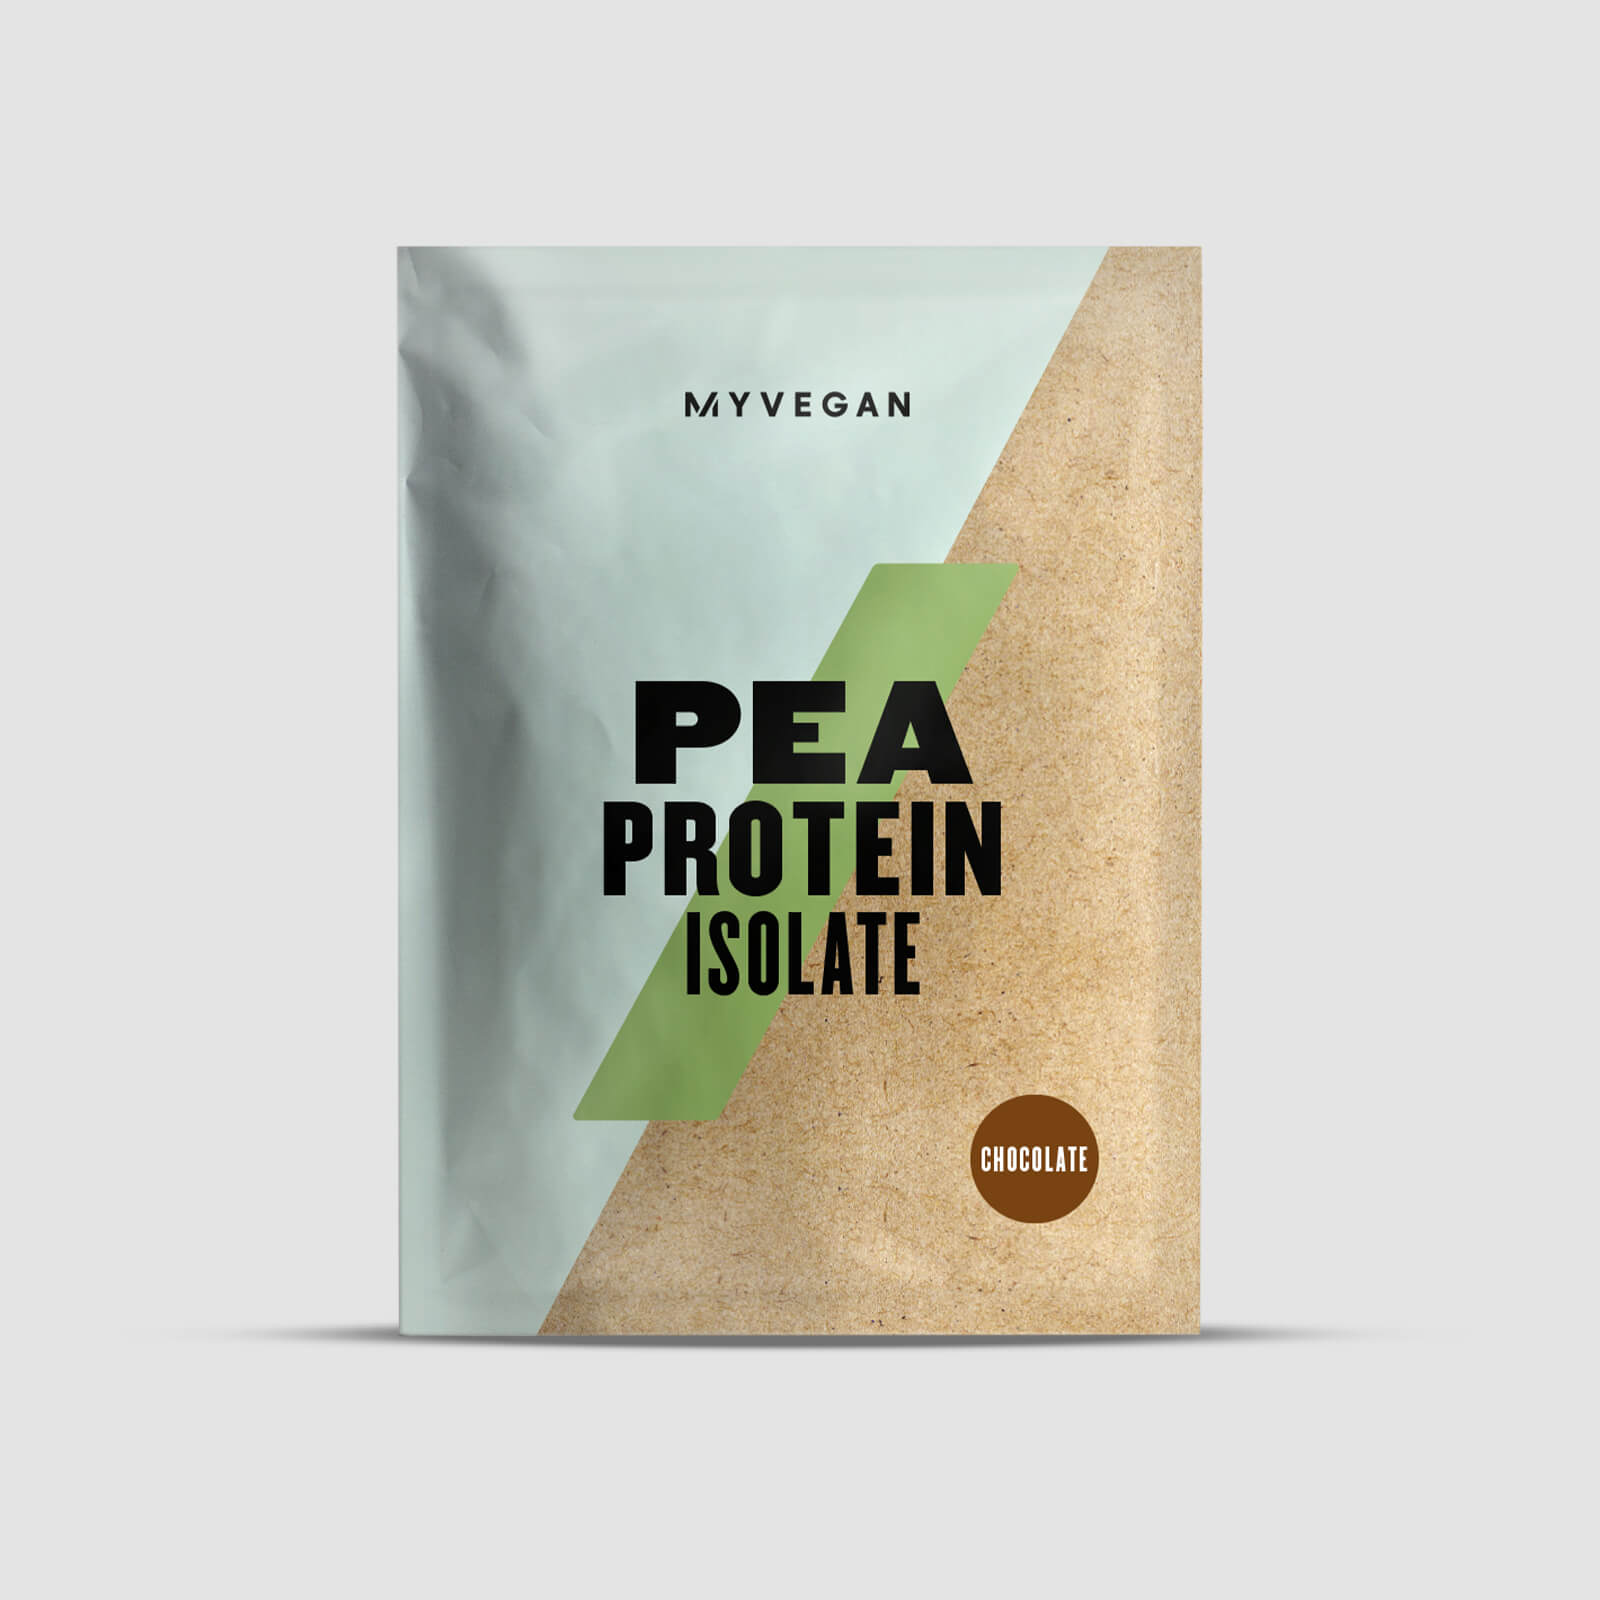 Pea Protein Isolate (Sample) - 30g - Chocolate